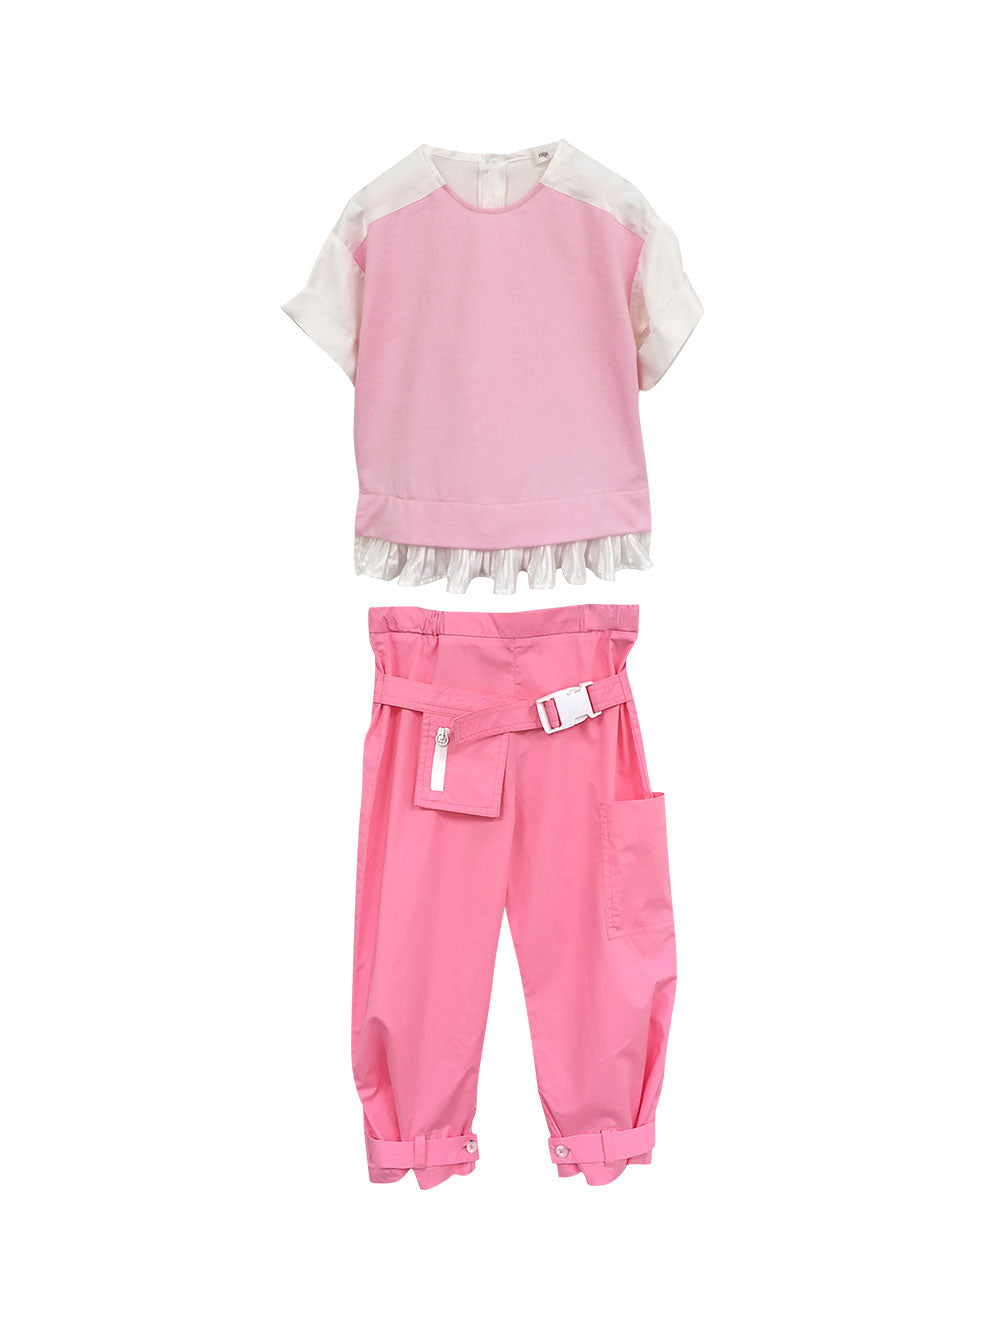 PREORDER: Pargo Pink Cargo Trousers